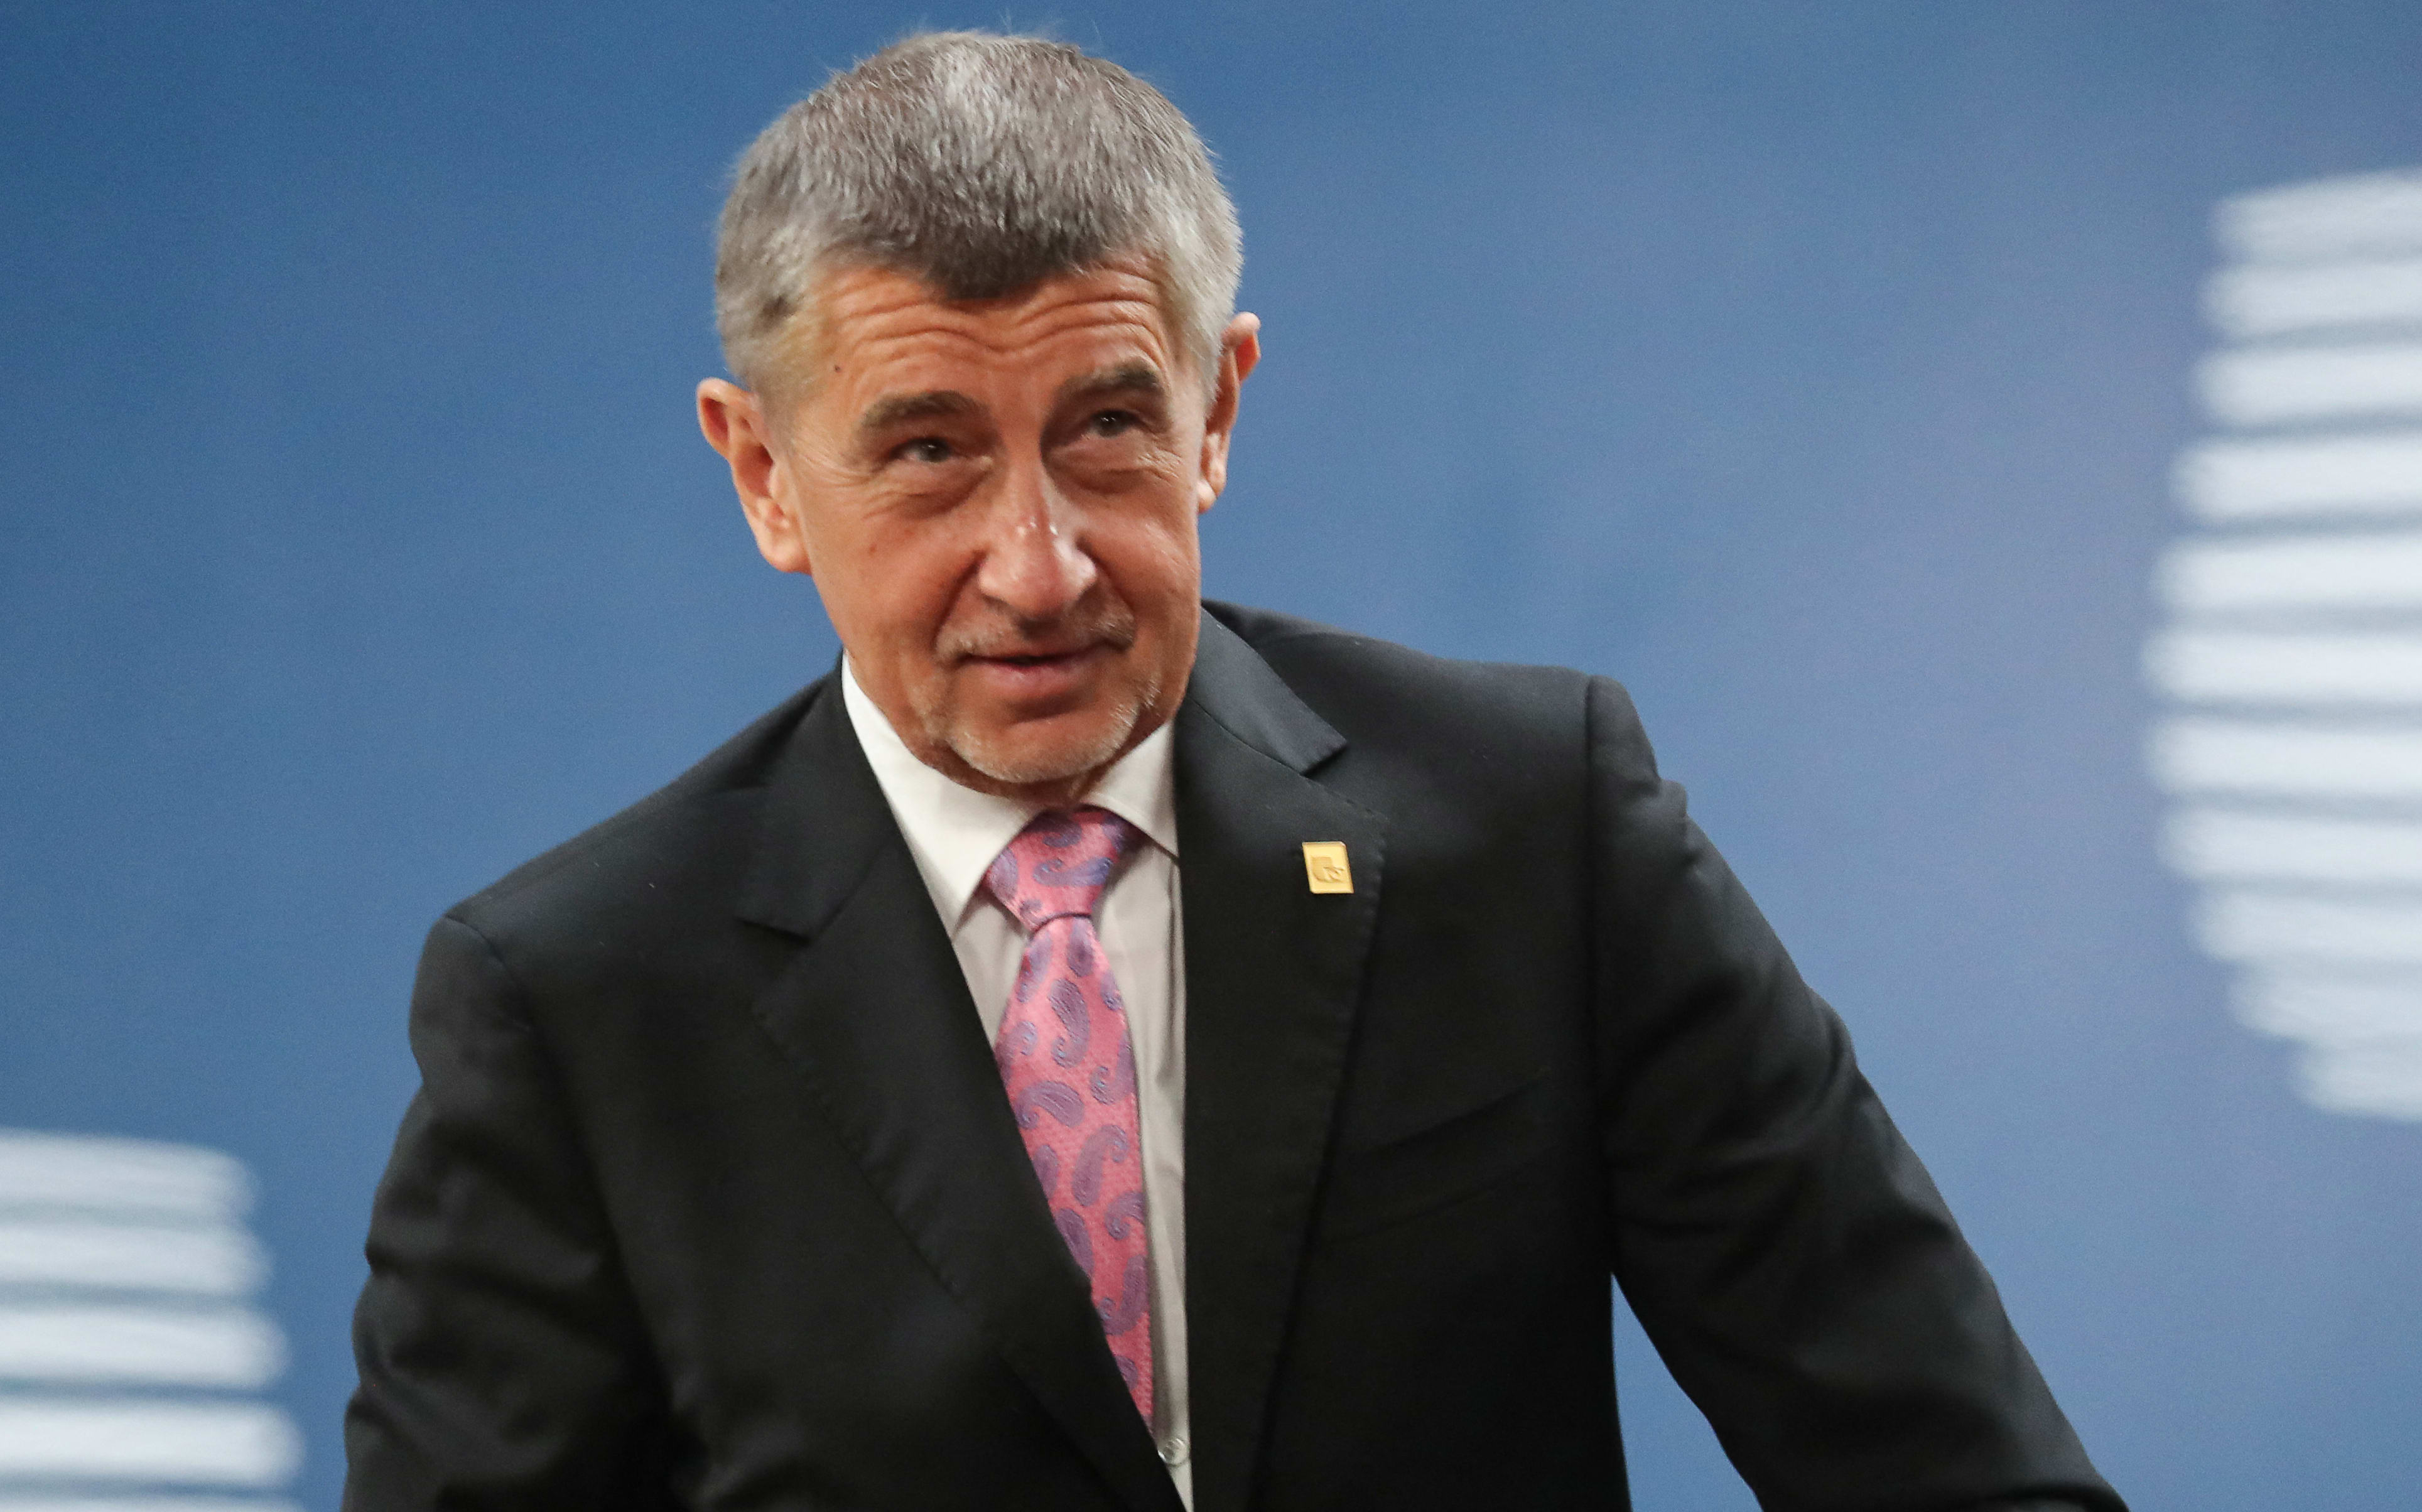 In this file photo taken on 21 February, 2020, Czech Republic's Prime Minister Andrej Babis arrives for the second day of a special European Council summit in Brussels, held to discuss the next long-term budget of the European Union (EU).